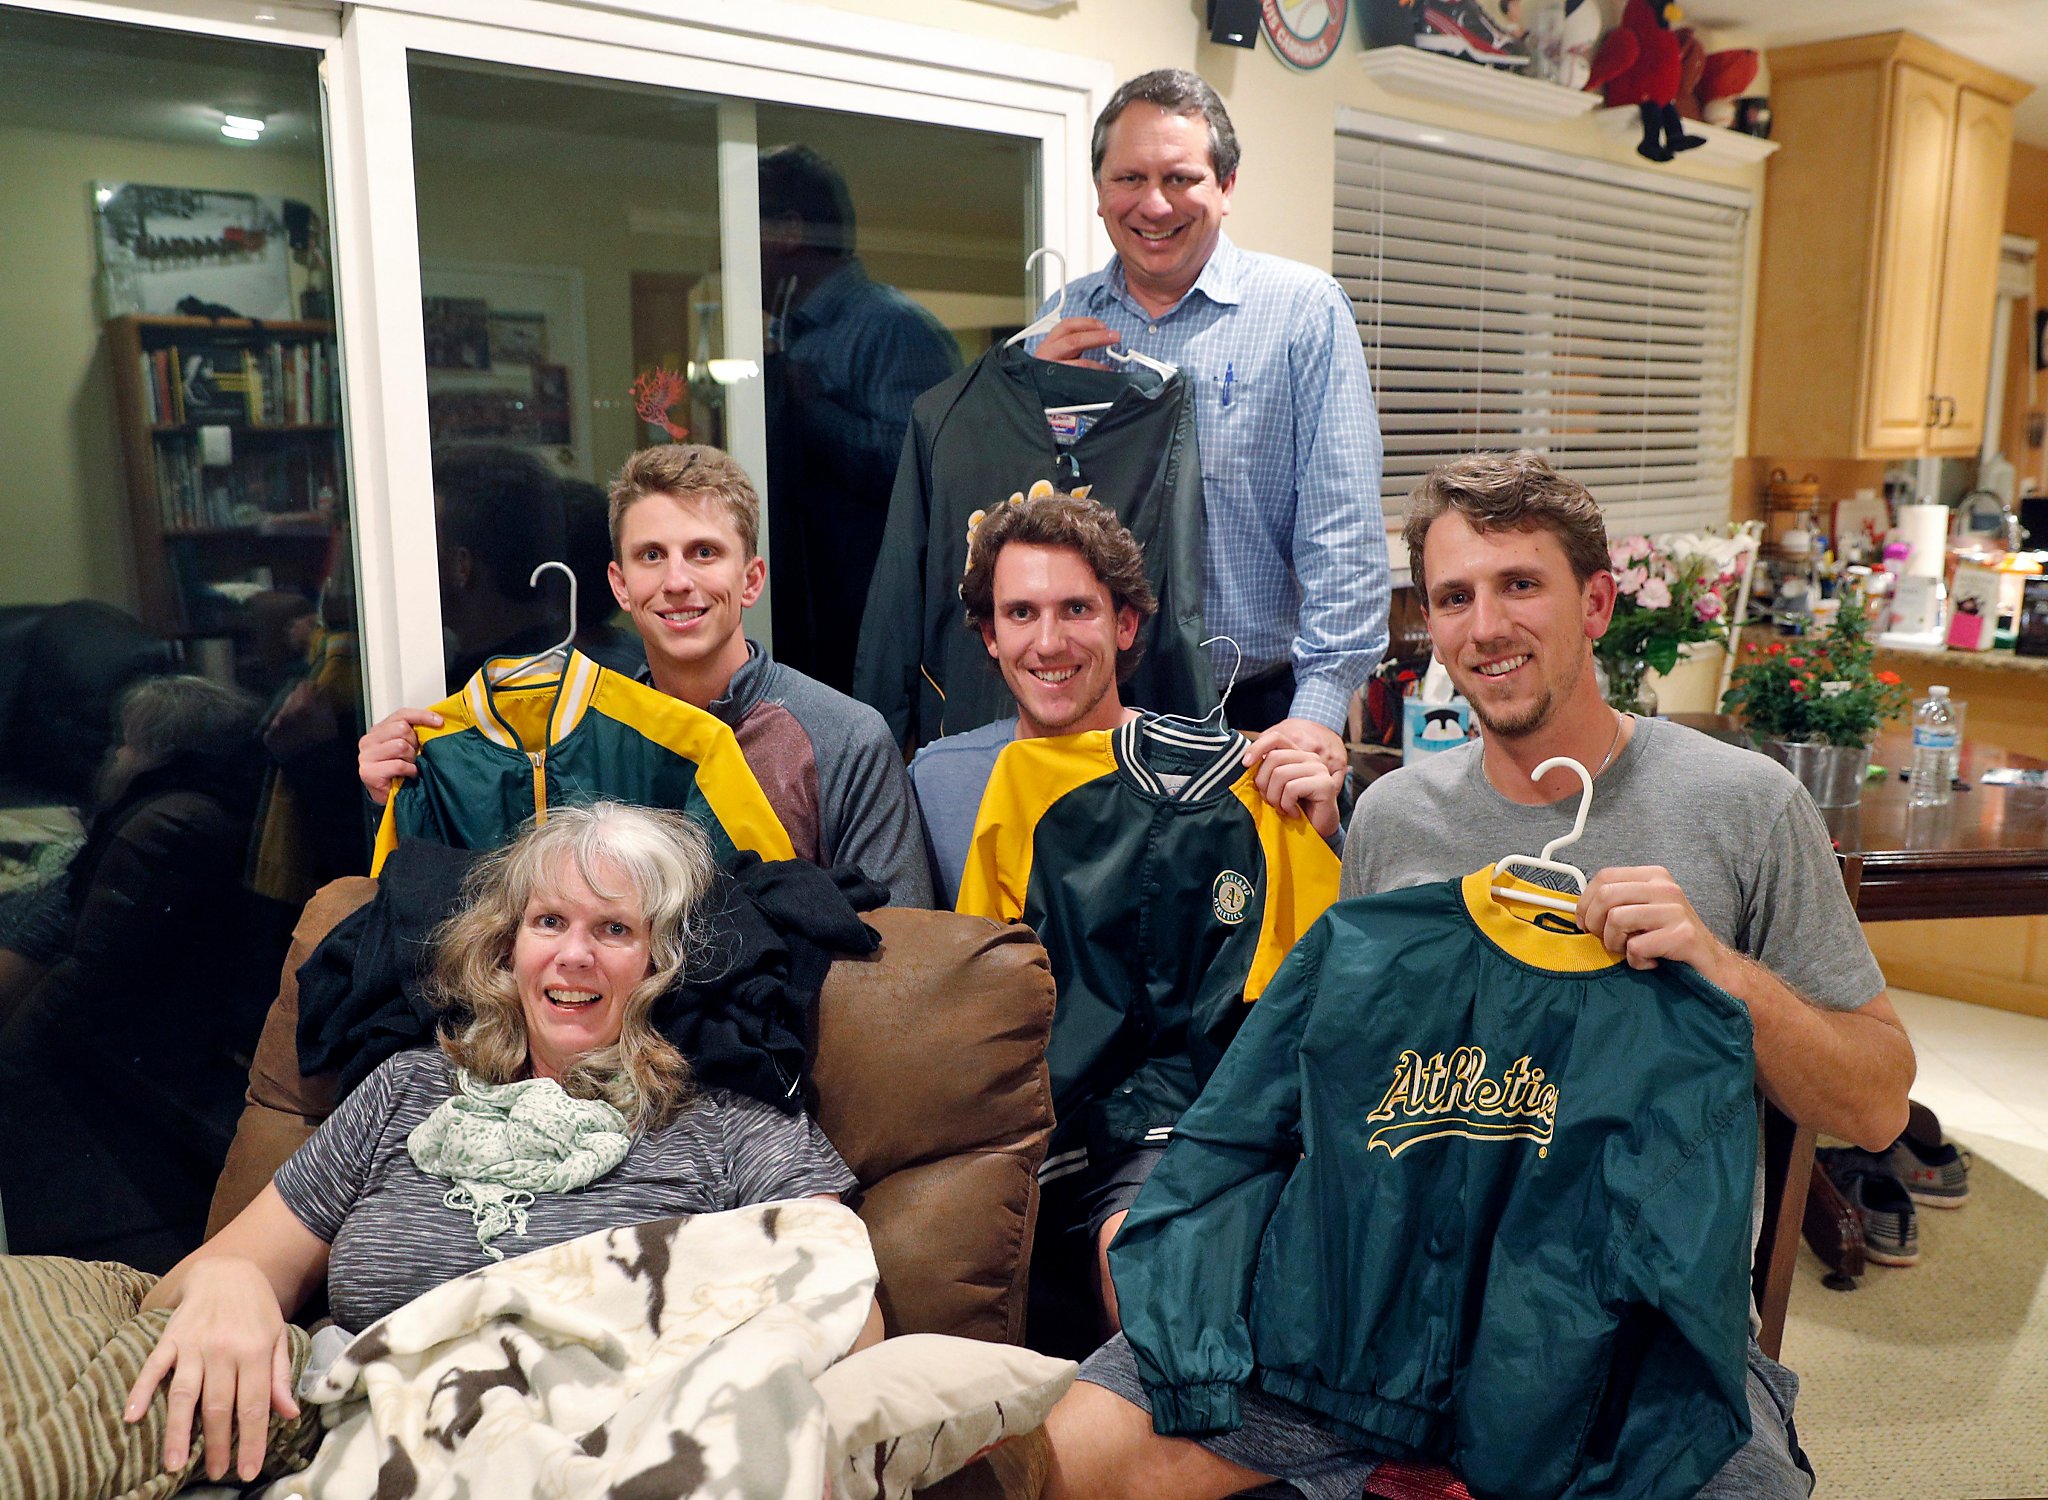 A's Stephen Piscotty hopeful Lou Gehrig Day can drive momentum in fight for  ALS cure